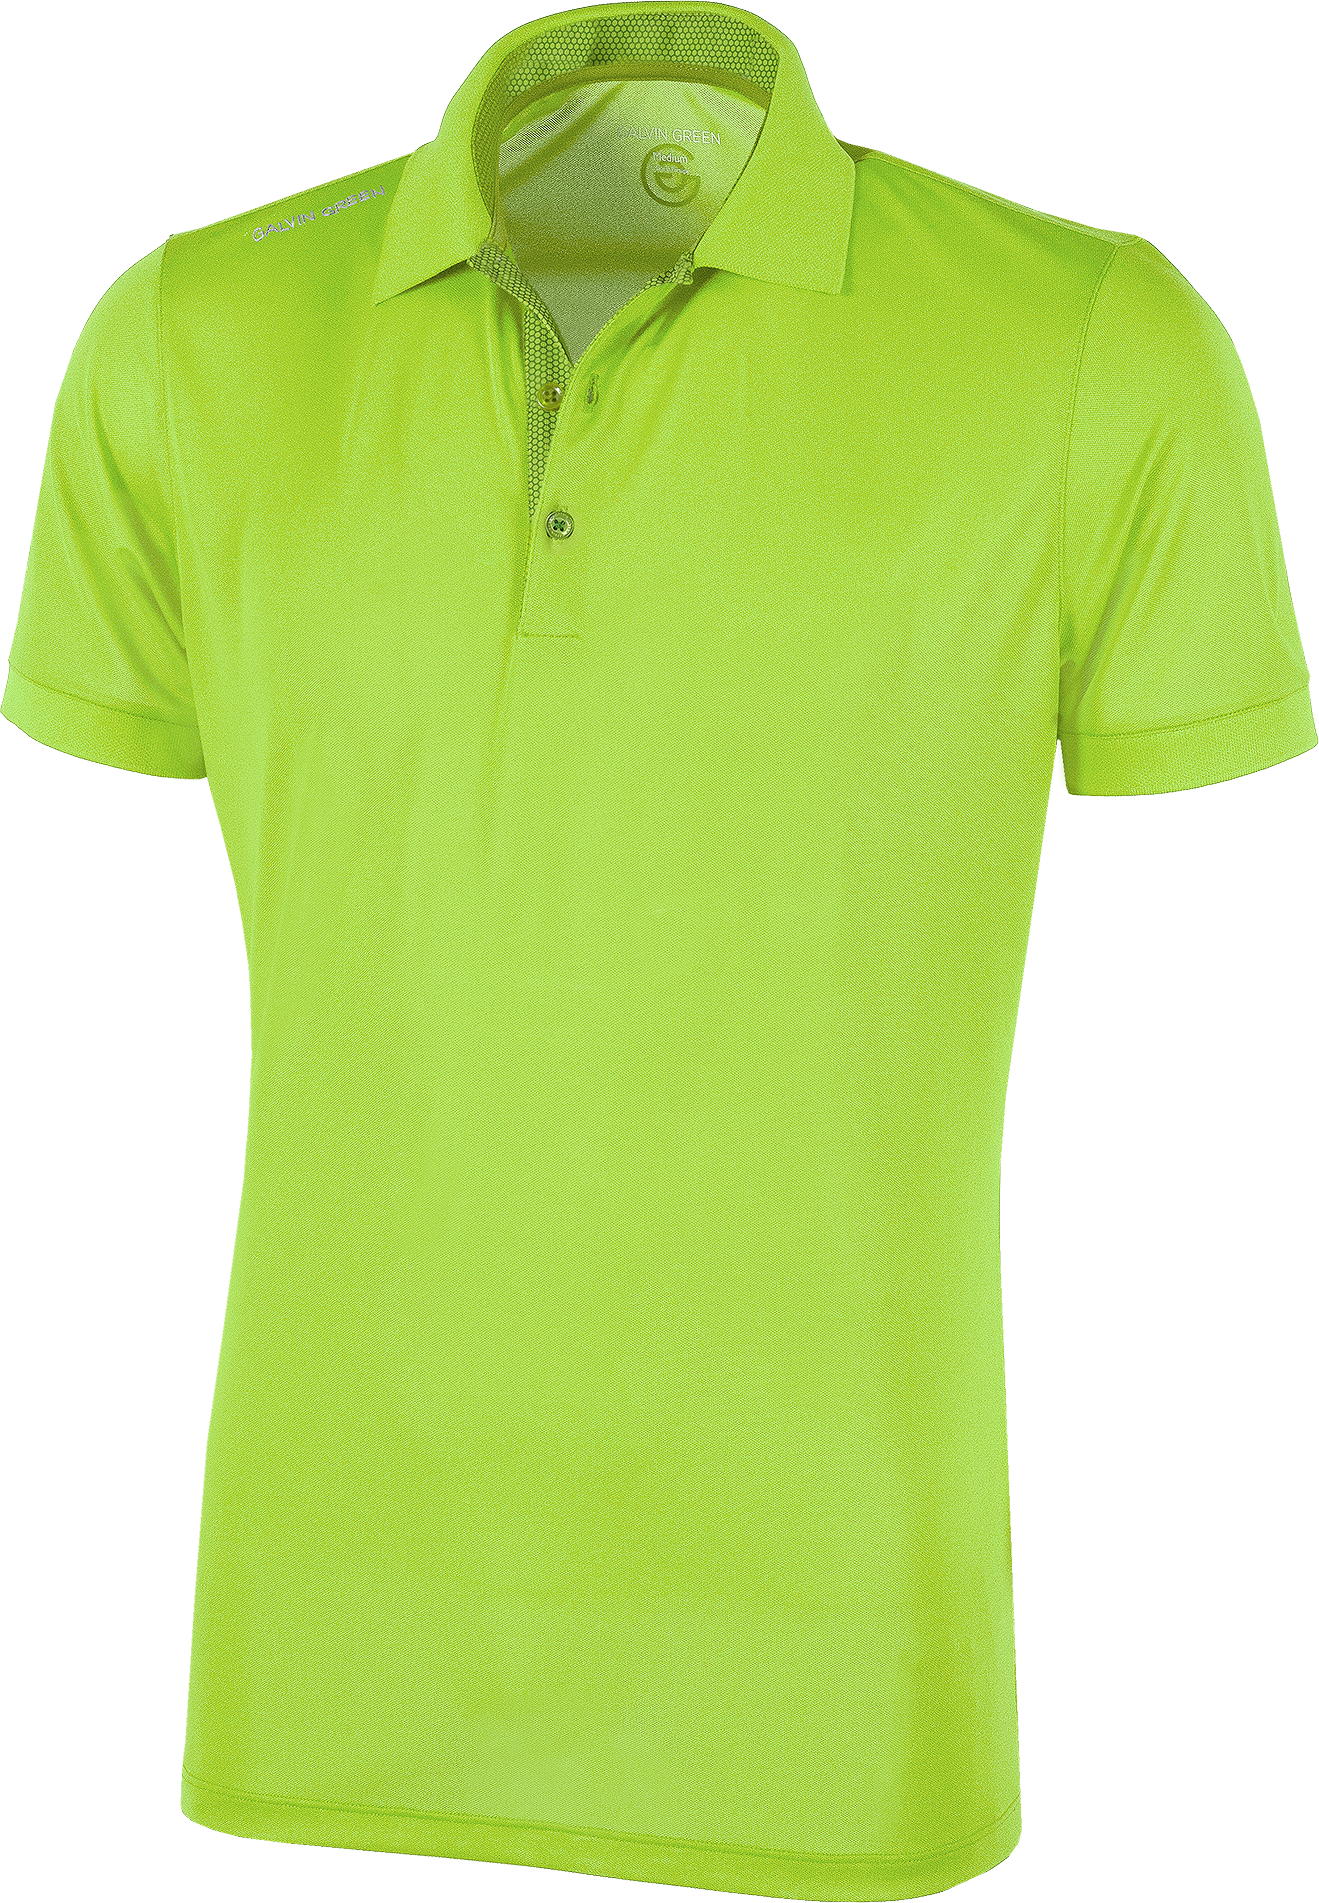 Galvin Green Max Ventils Plus Polo, lime